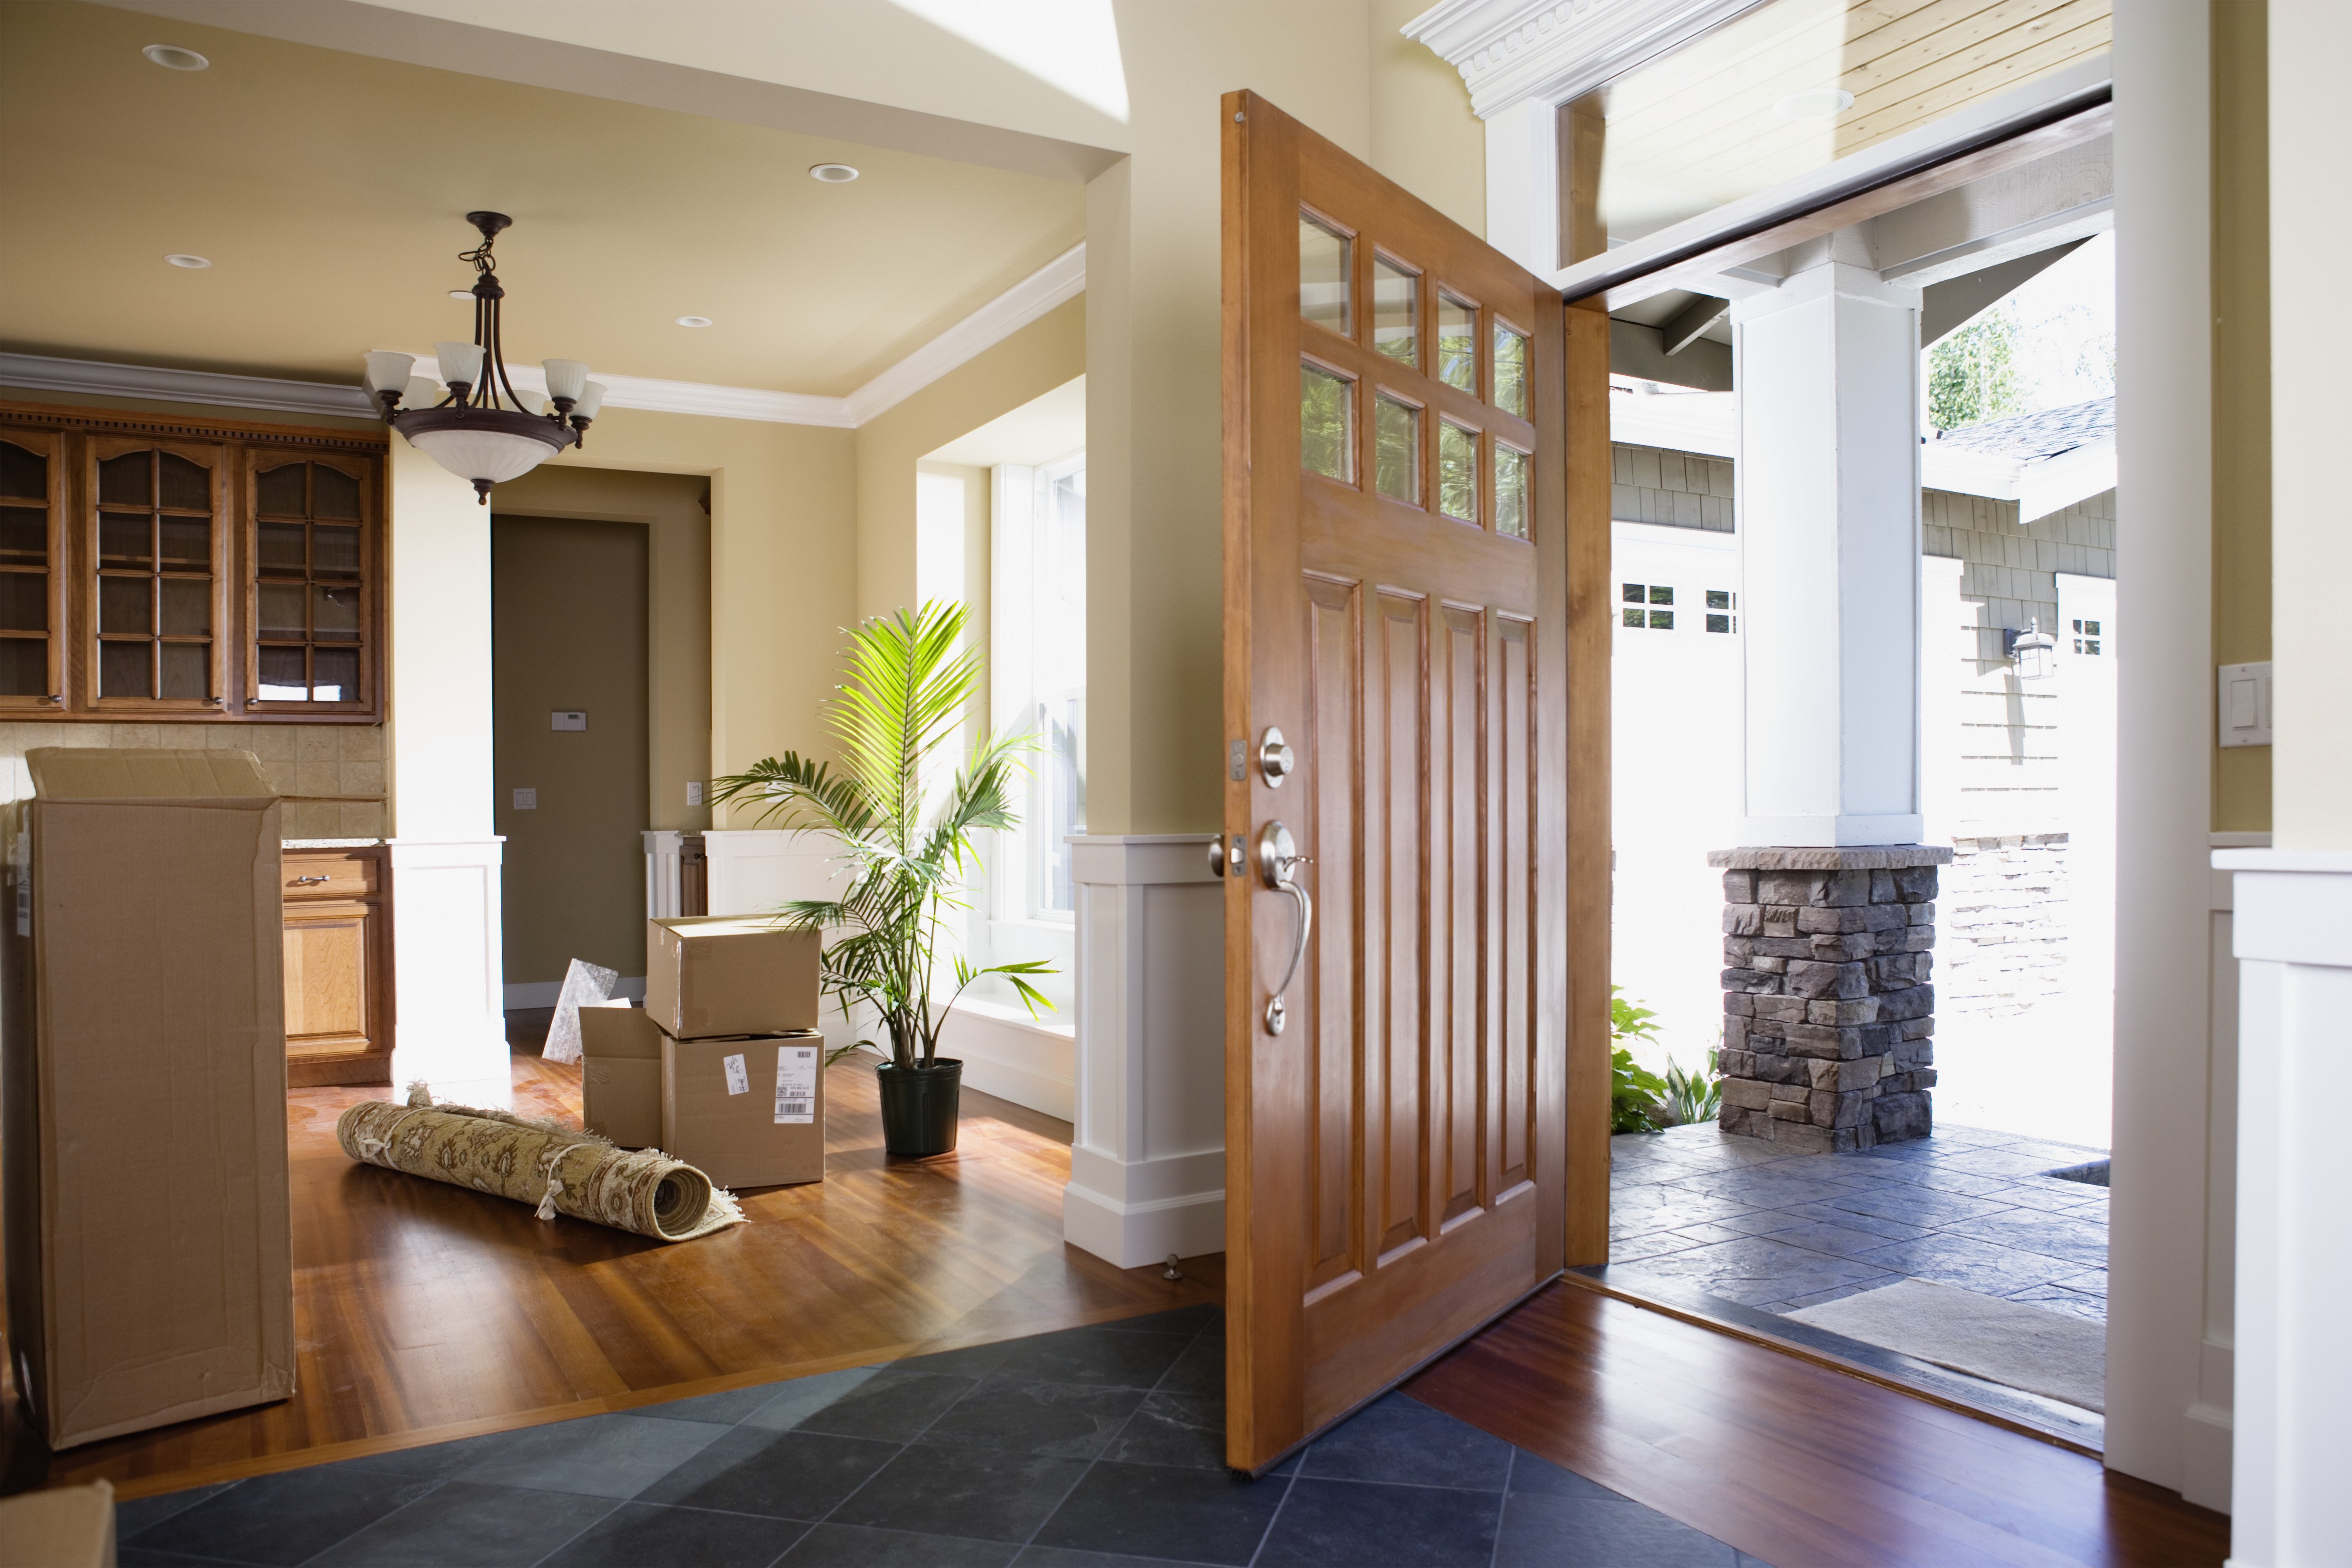 The open front door inside a home | Source: Getty Images